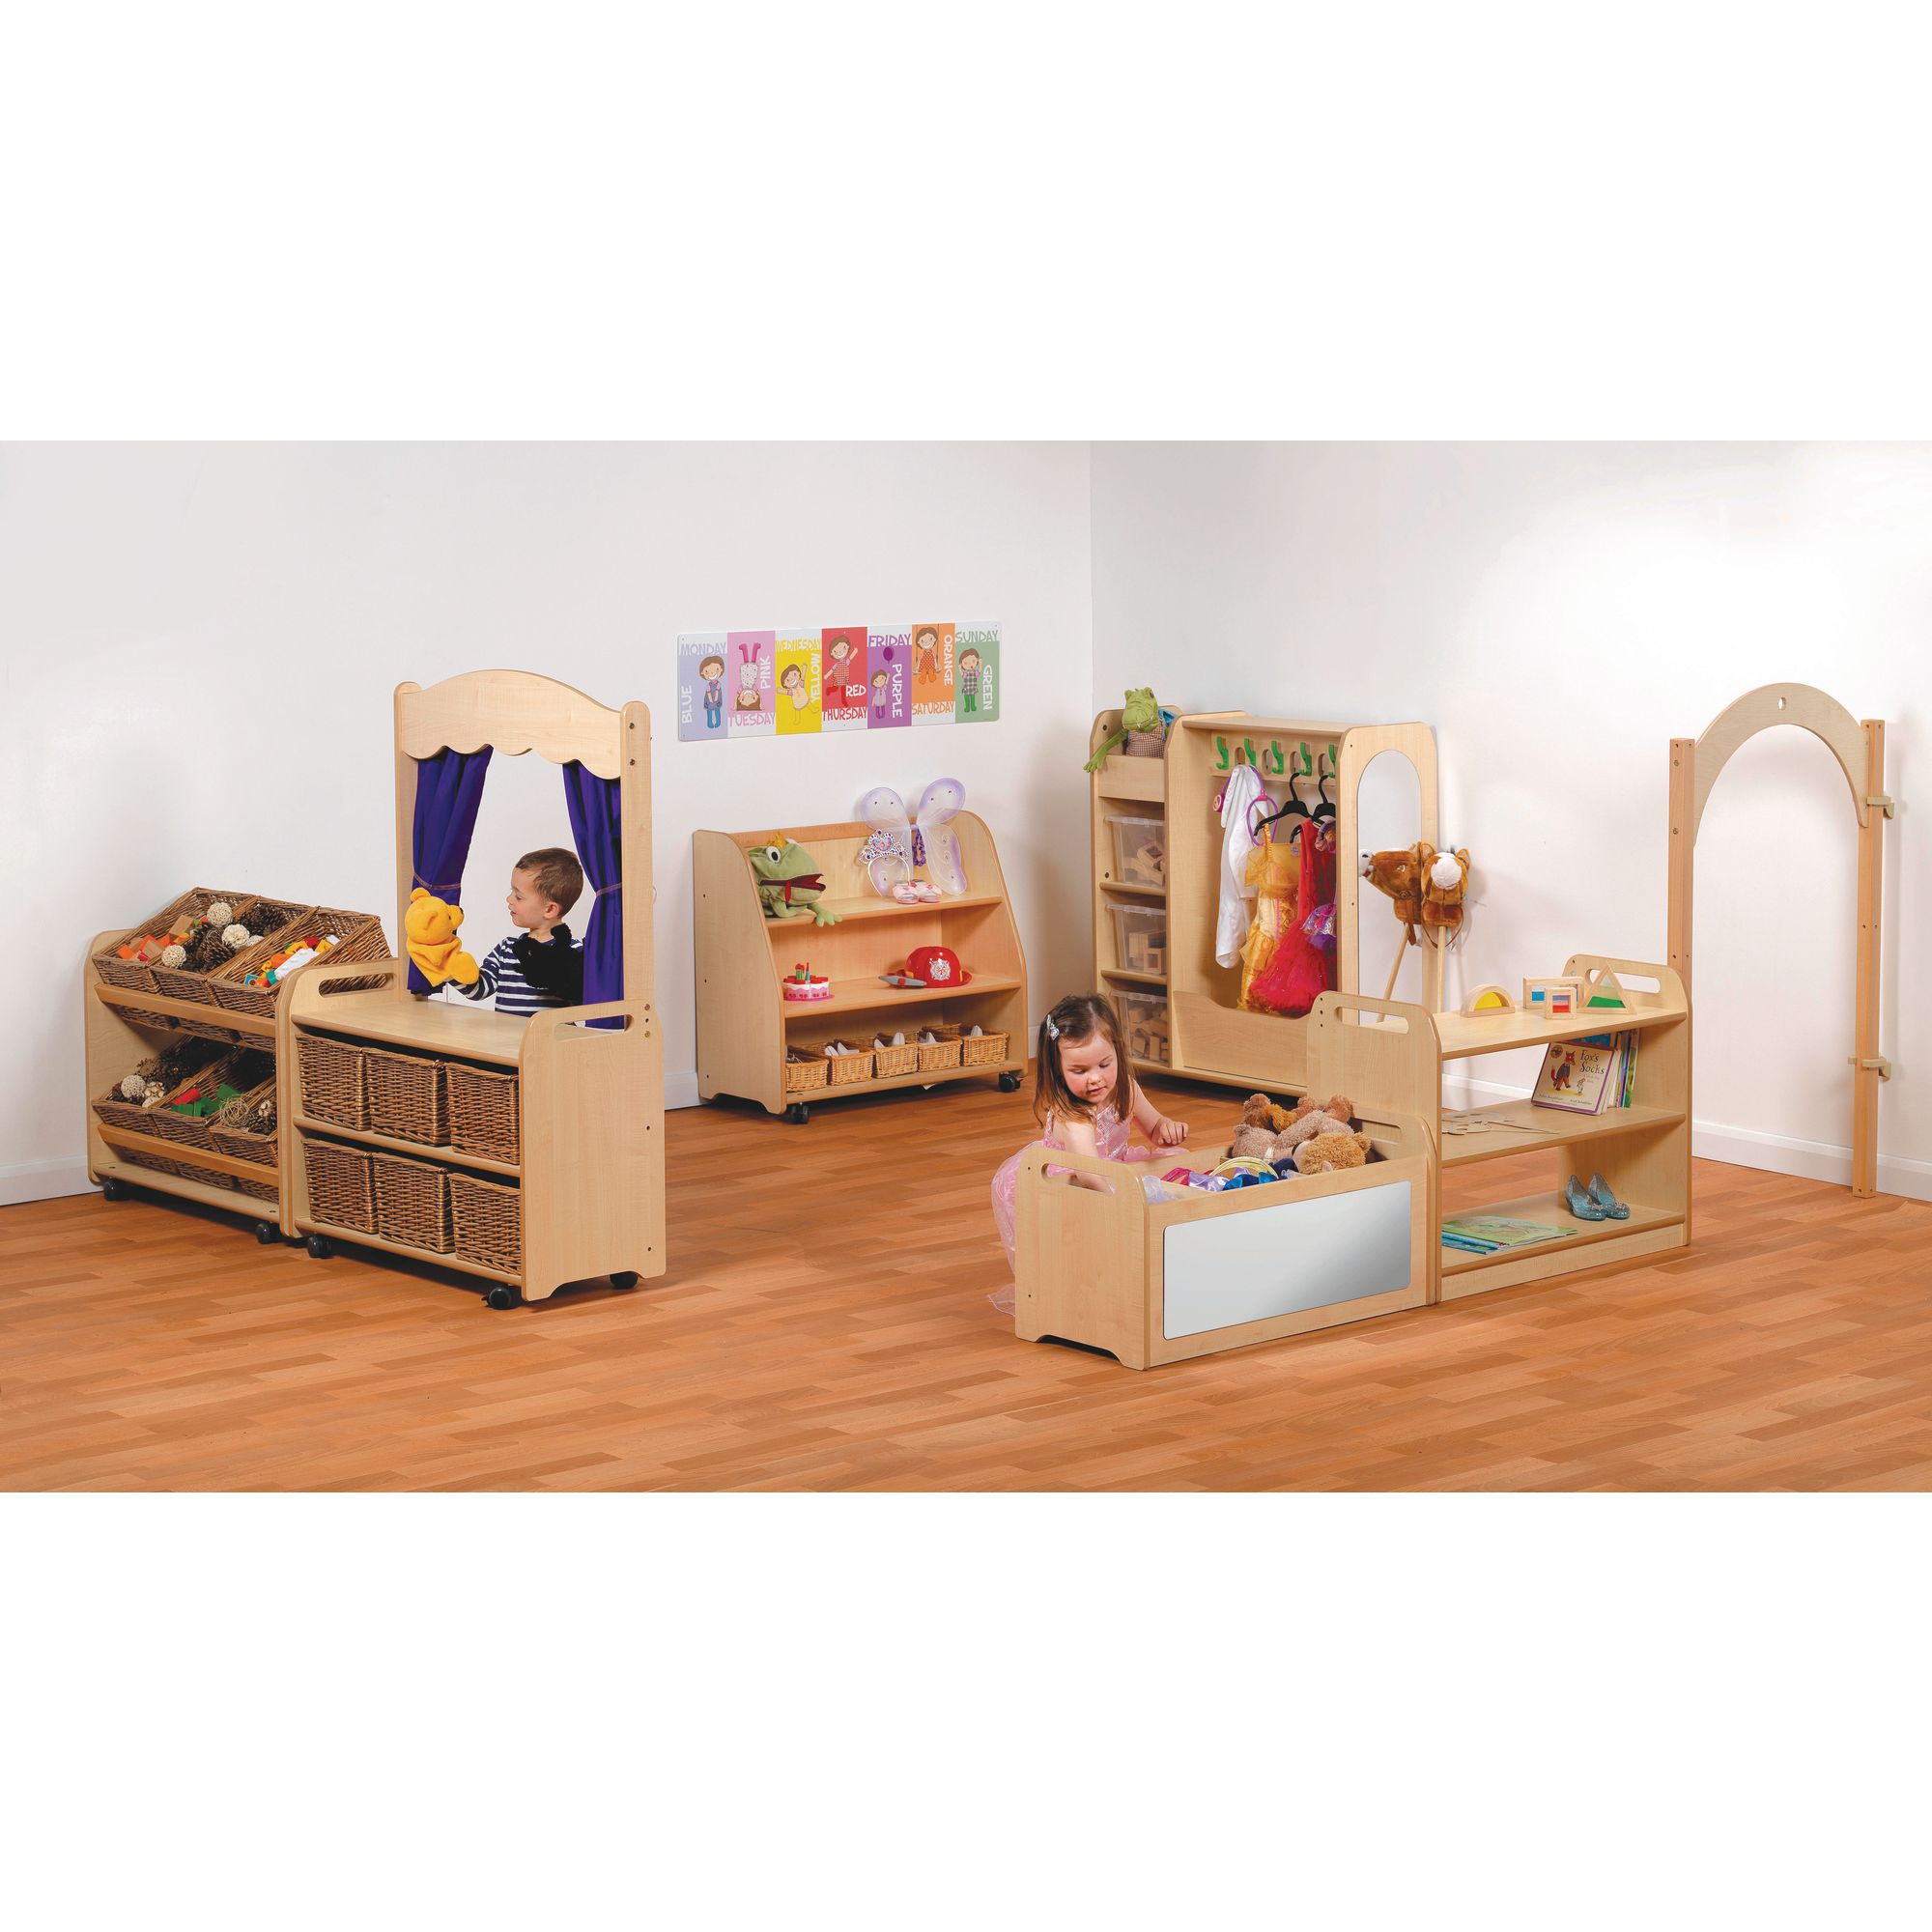 Playscapes Dressing Up Zone